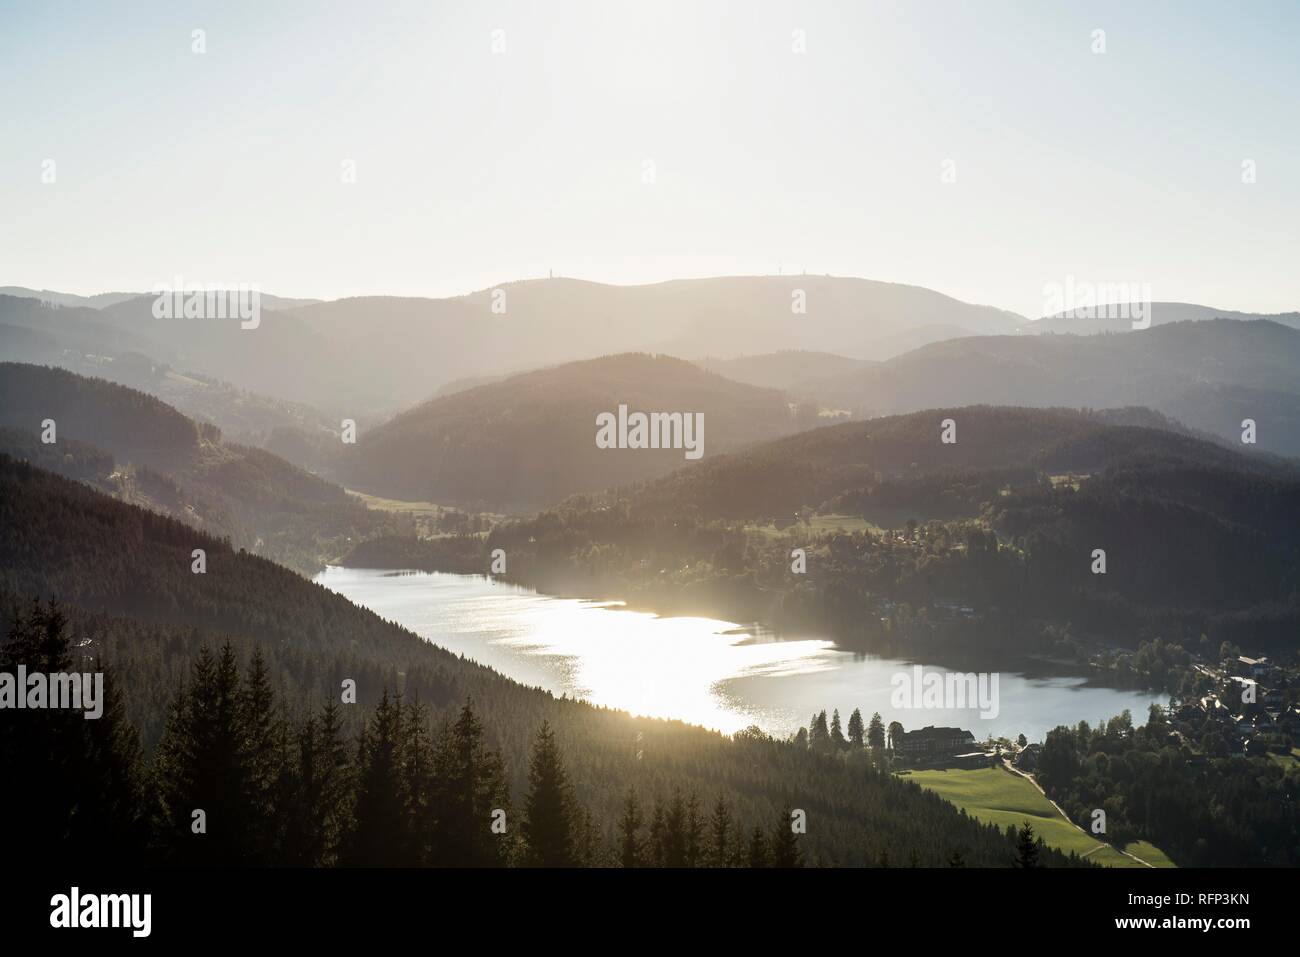 View from Hochfirst to Lake Titisee and Feldberg mountain at sunset, near Neustadt, Black Forest, Baden-Württemberg, Germany Stock Photo